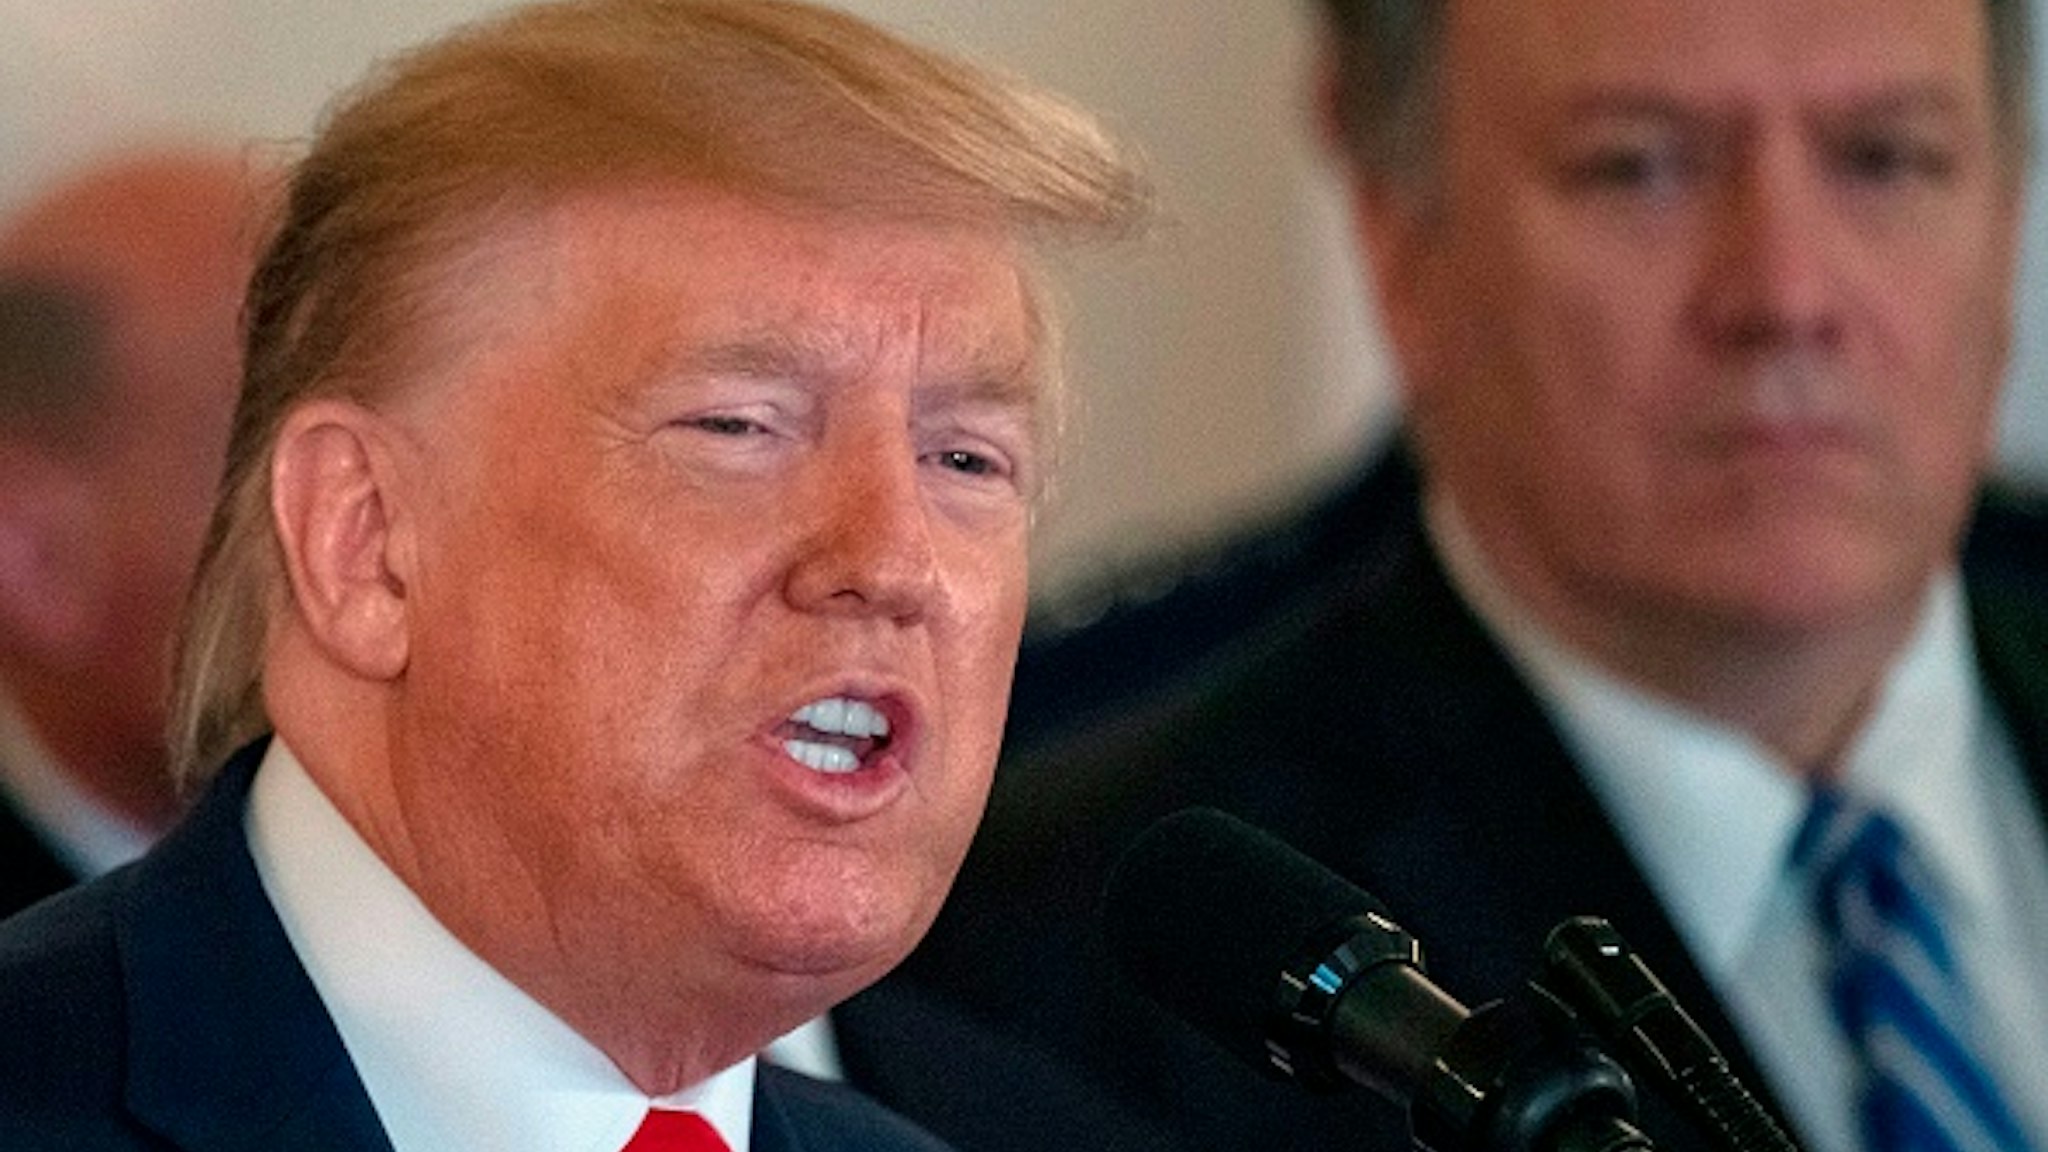 US Secretary of State Mike Pompeo(R) listens as US President Donald Trump speaks about the situation with Iran in the Grand Foyer of the White House in Washington, DC, January 8, 2020.